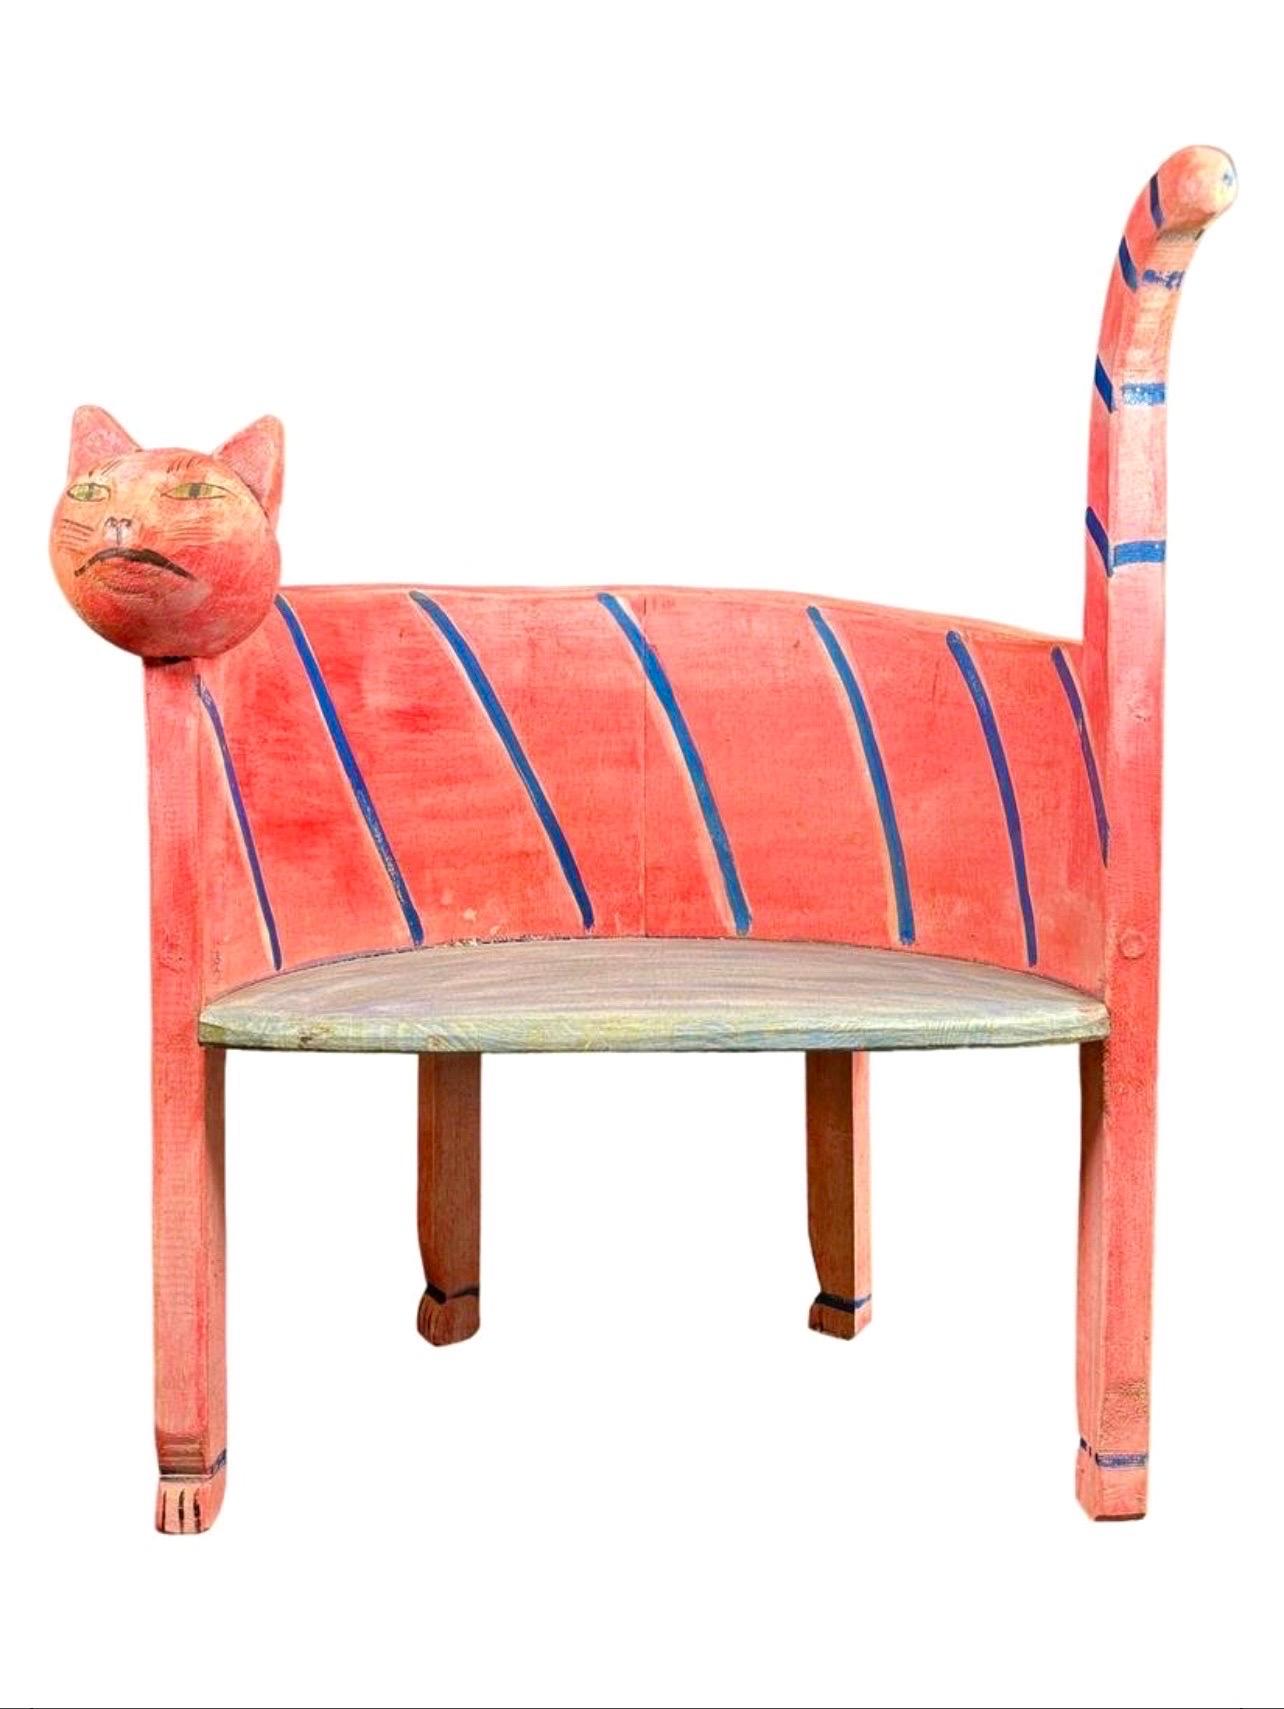 French Folk Art Hand Carved Painted Whimsical Childrens Cat Chair Gerard Rigot